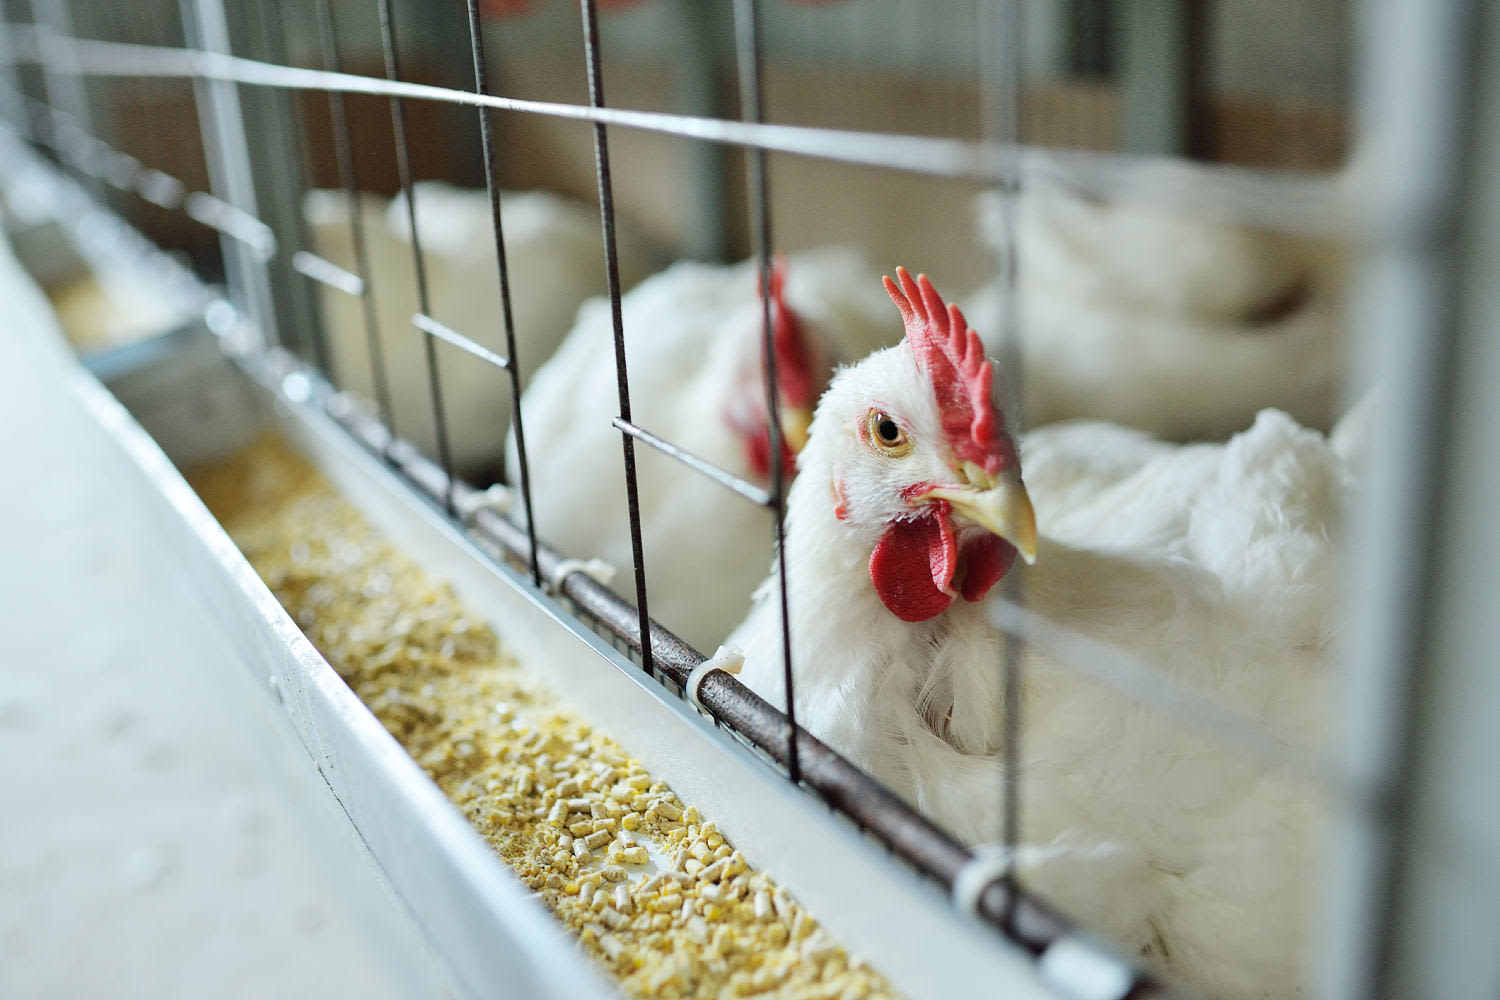 3rd person in US infected with bird flu: What to know about symptoms and transmission